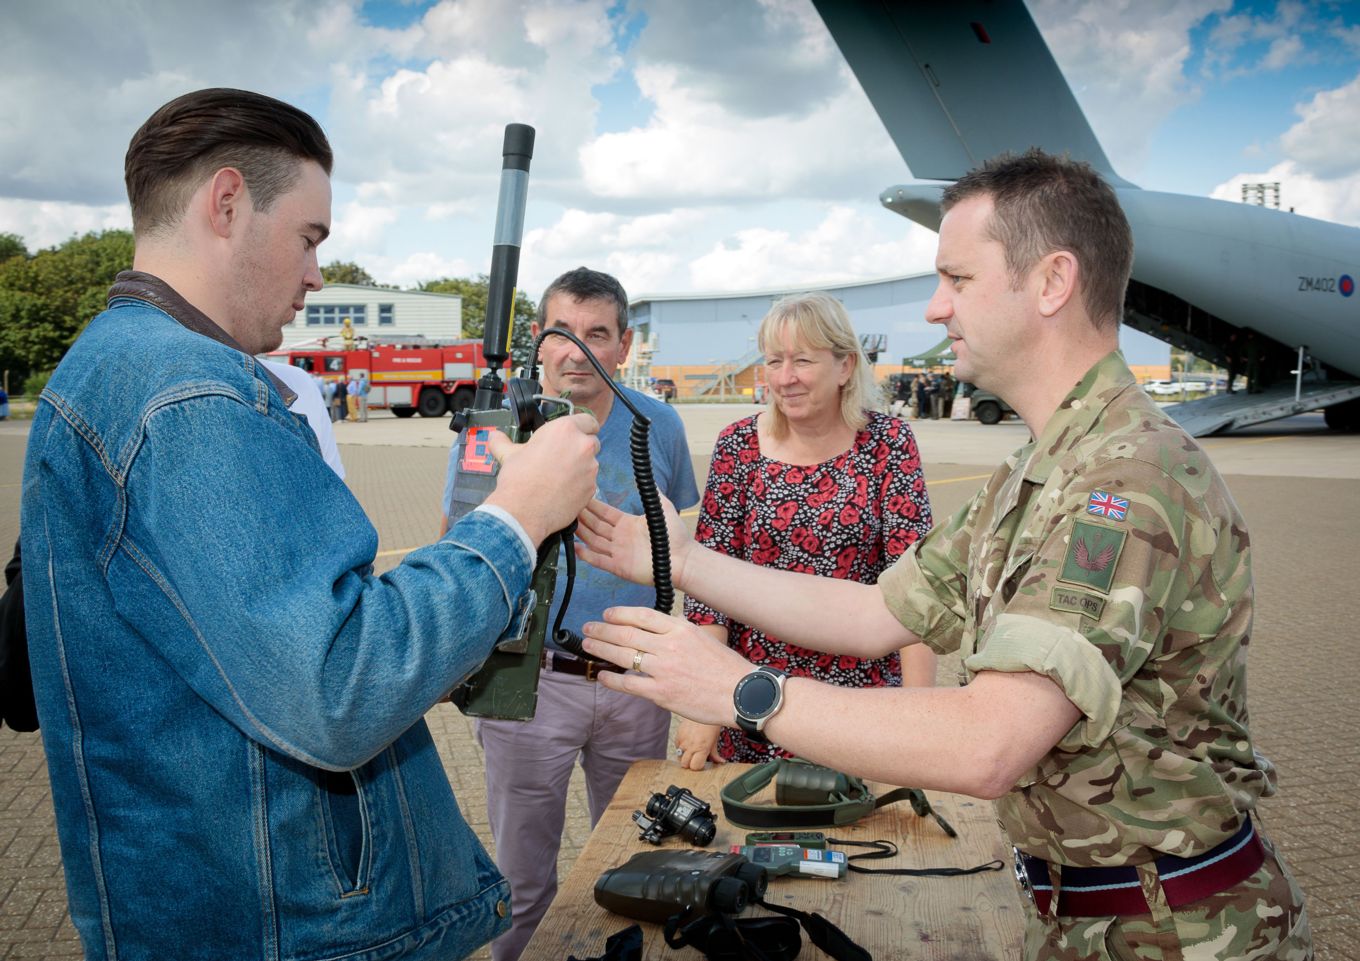 Tactical Air Traffic demonstrated their equipment and discussed their role within the RAF